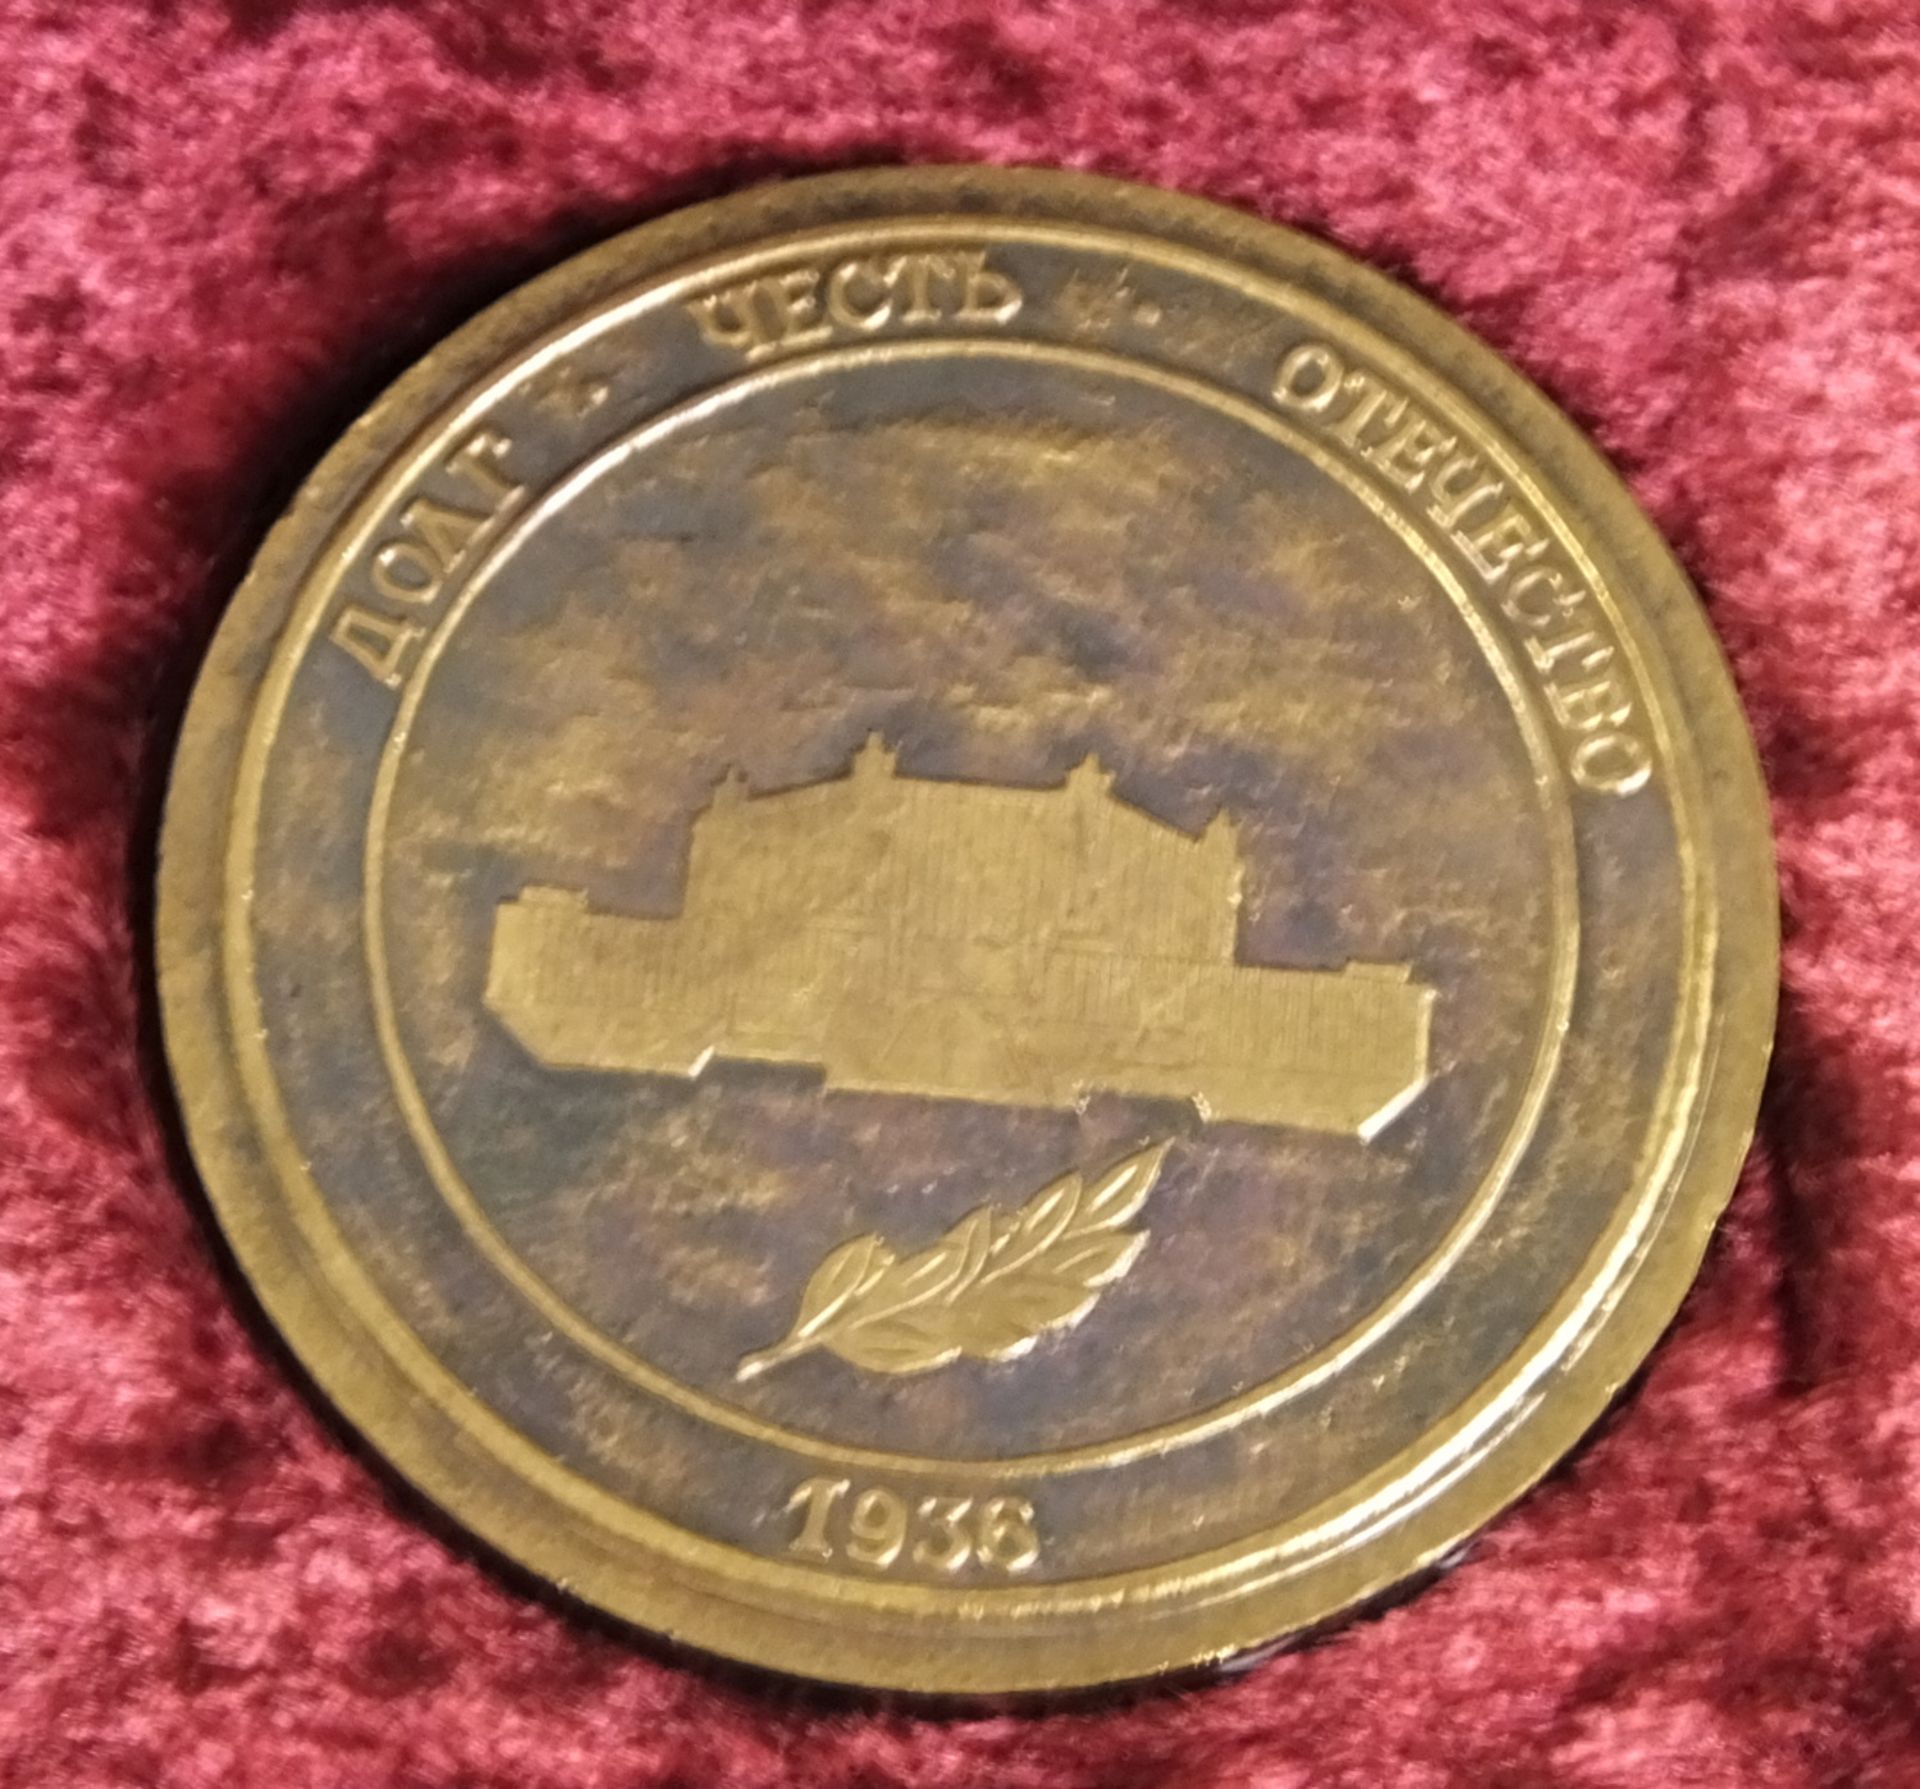 Greek Military Commemorative Challenge Coin - Image 2 of 3